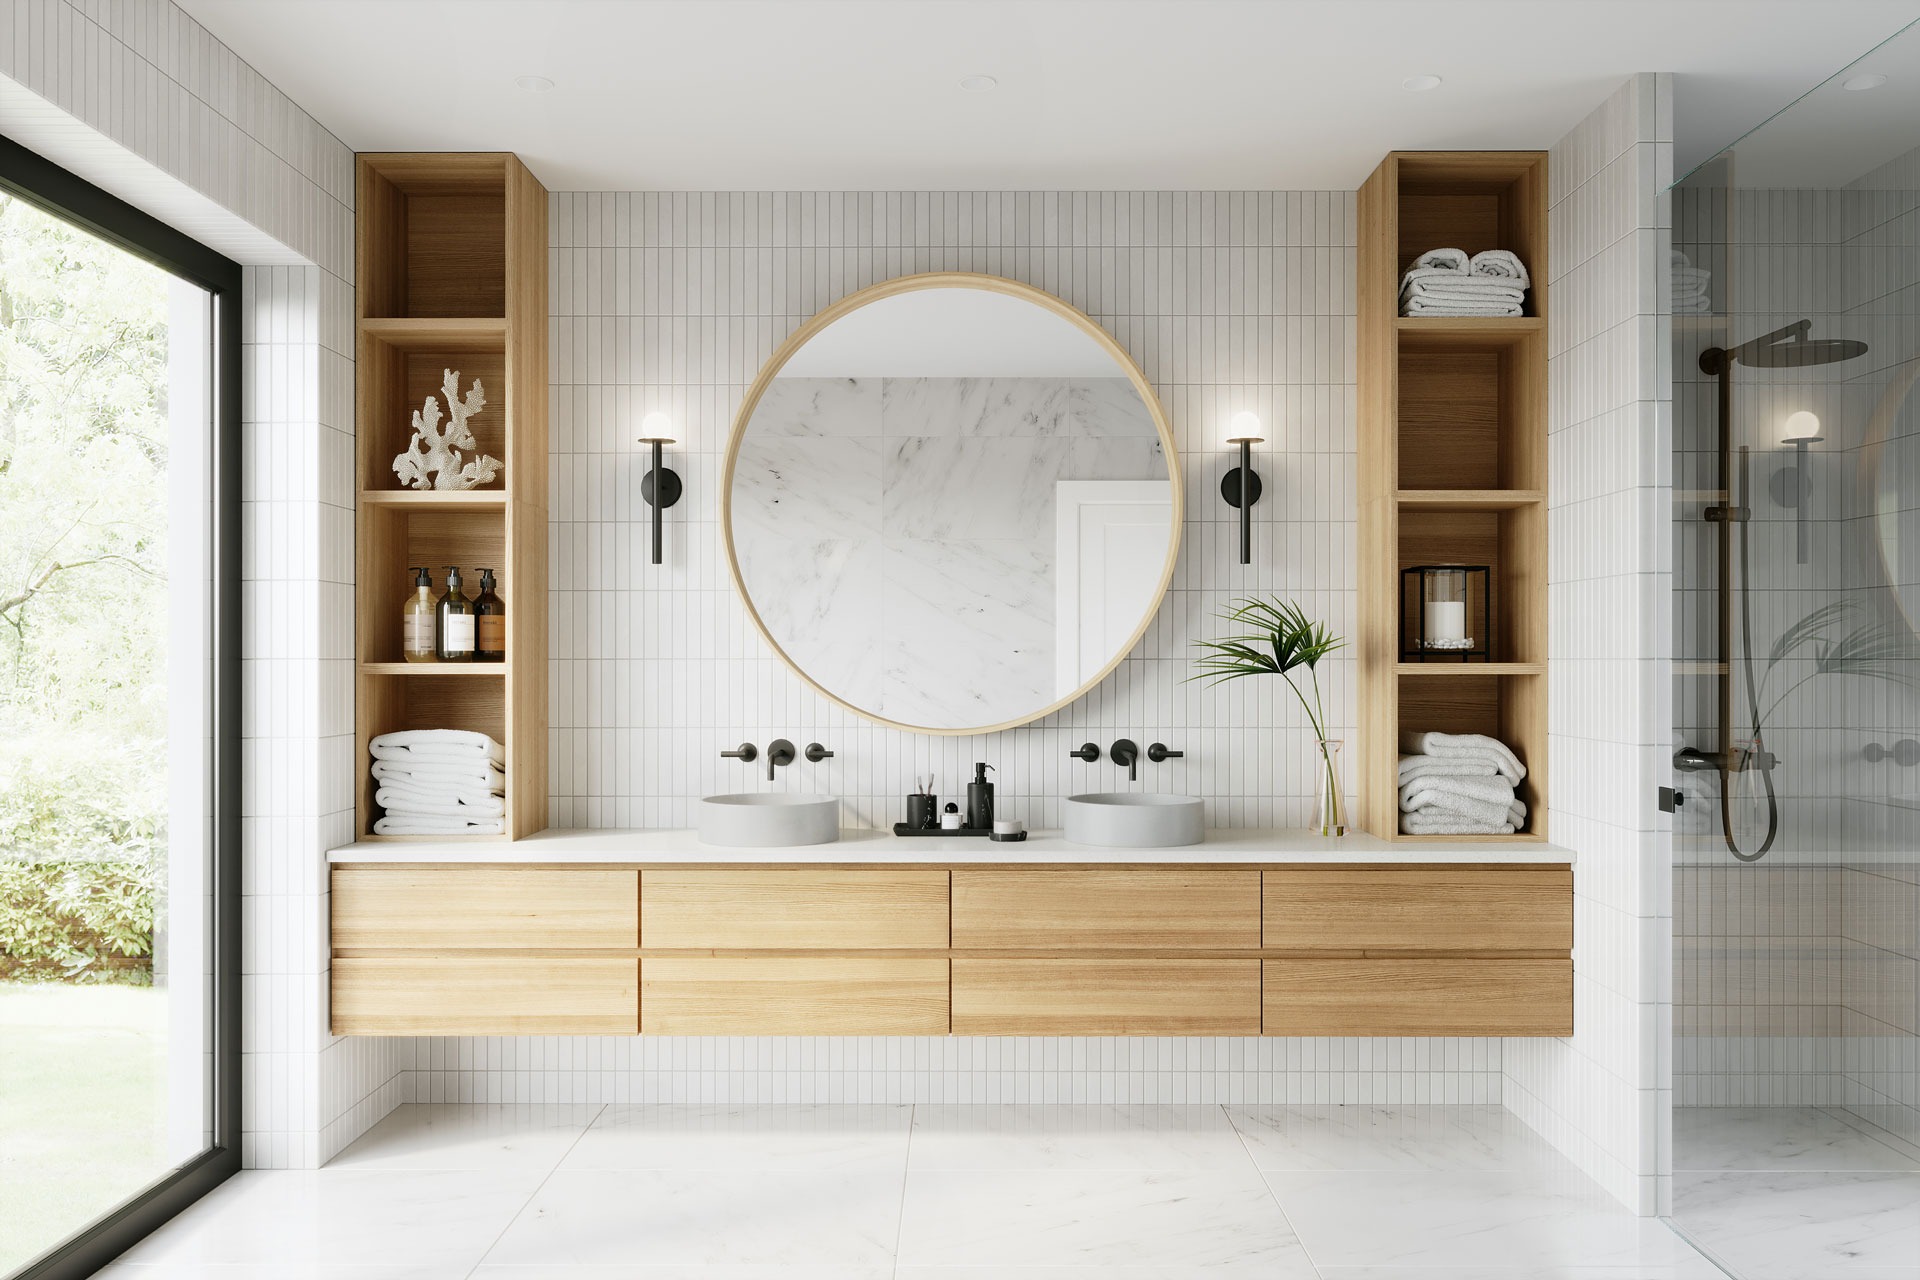 3D Visualization for Bathroom Products